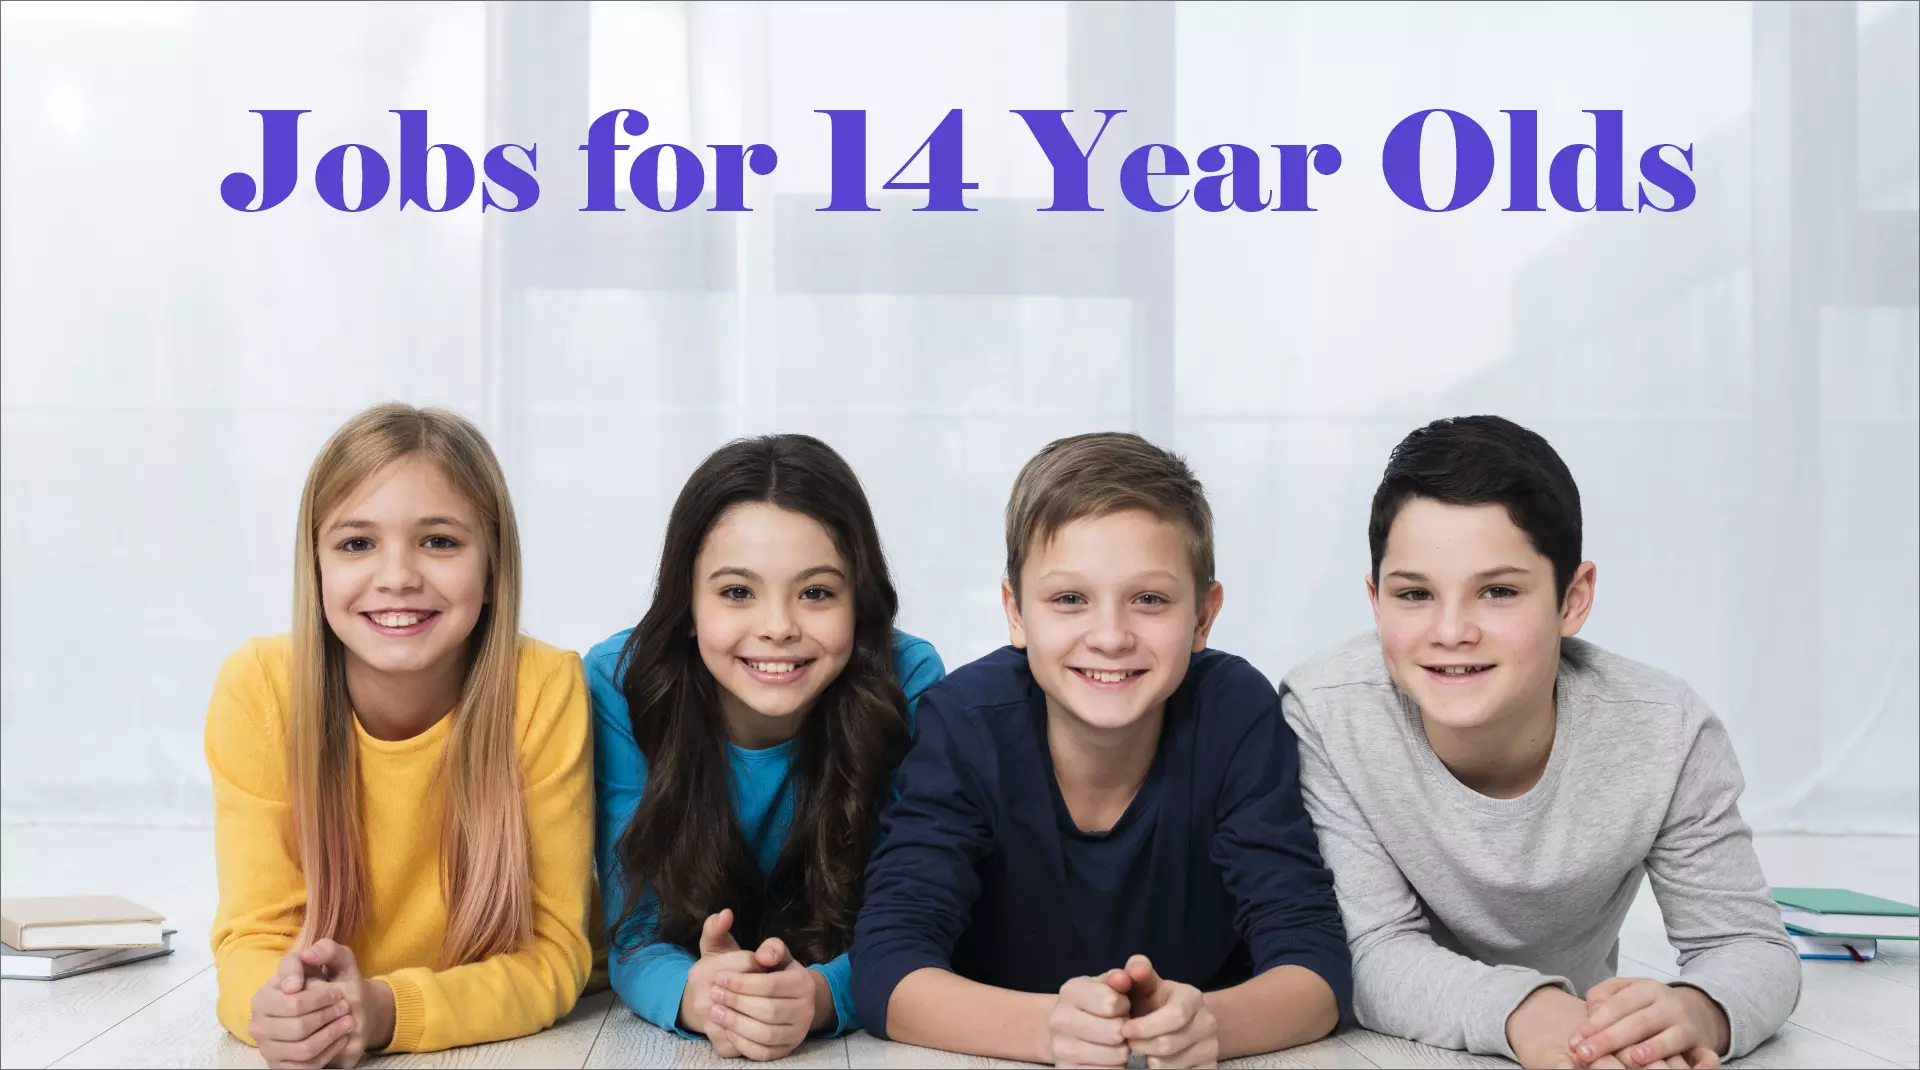 Jobs for 14 Year Olds